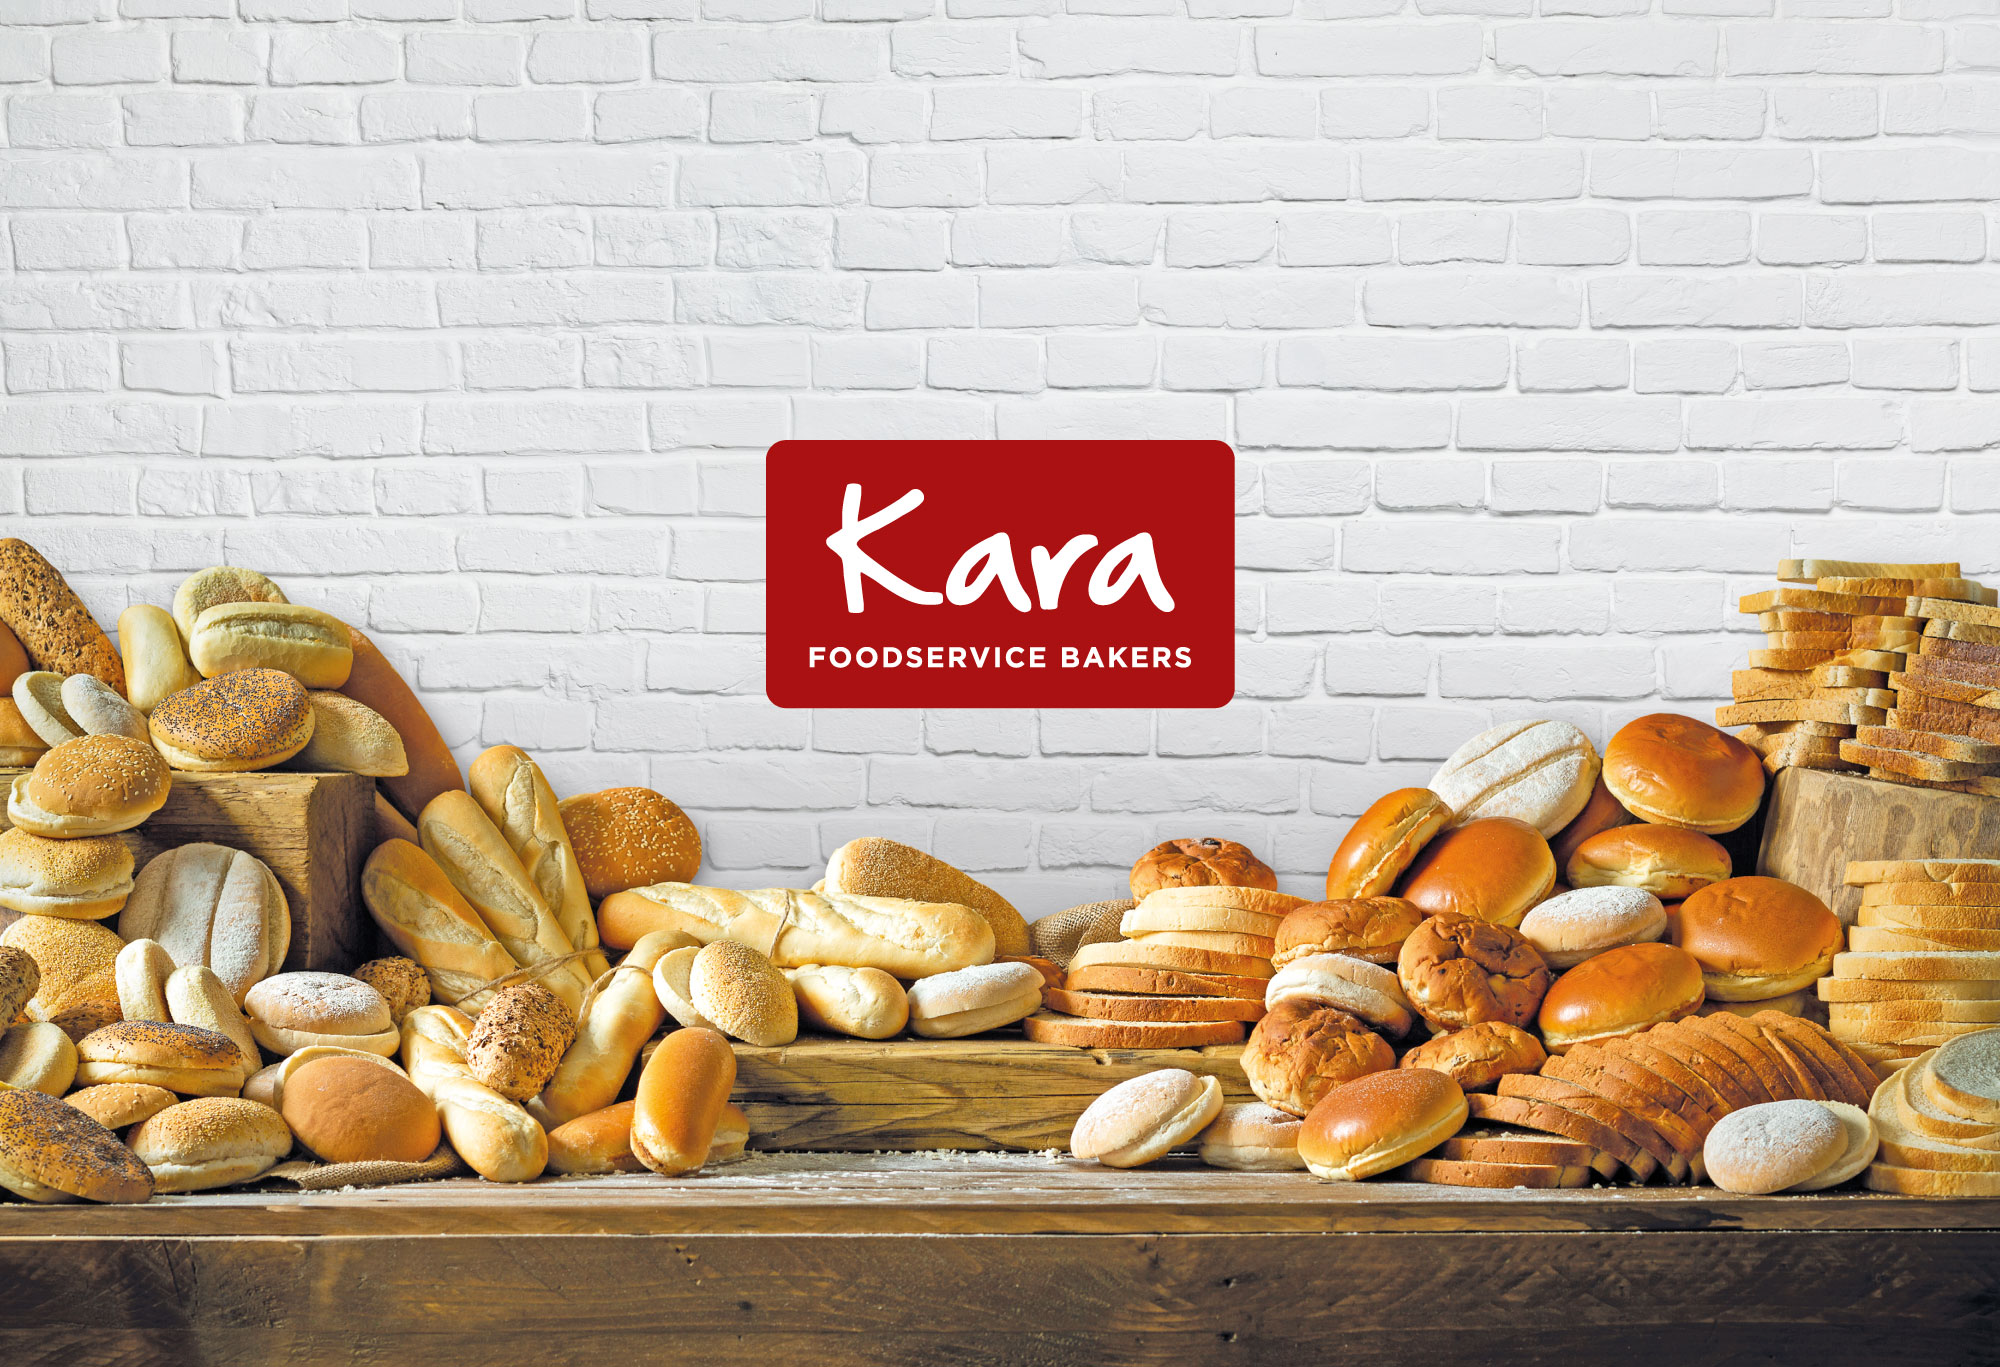 A relationship baked to perfection. Reech continues partnership with Kara Foodservice